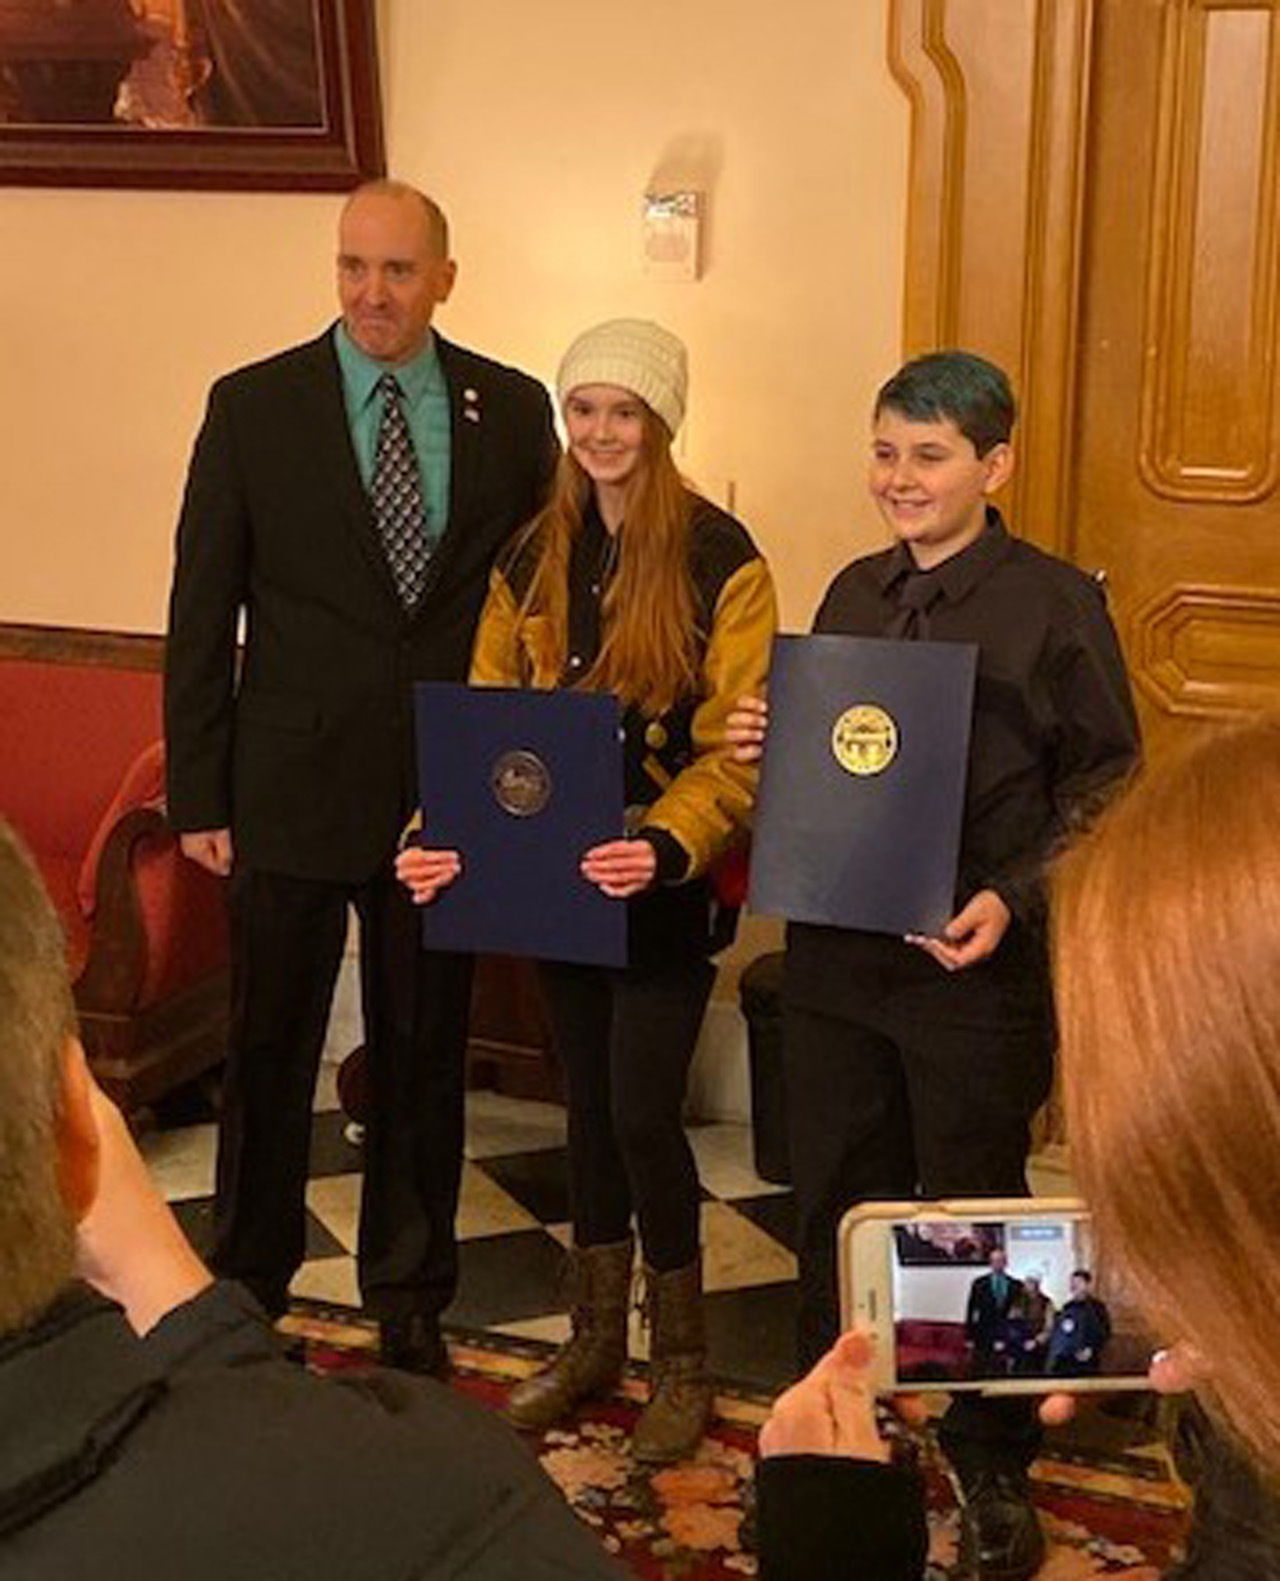 Rep. Holmes presents commendations to students Starley Jacobs and Mason Torres, winners of the Techcorps Hackathon.